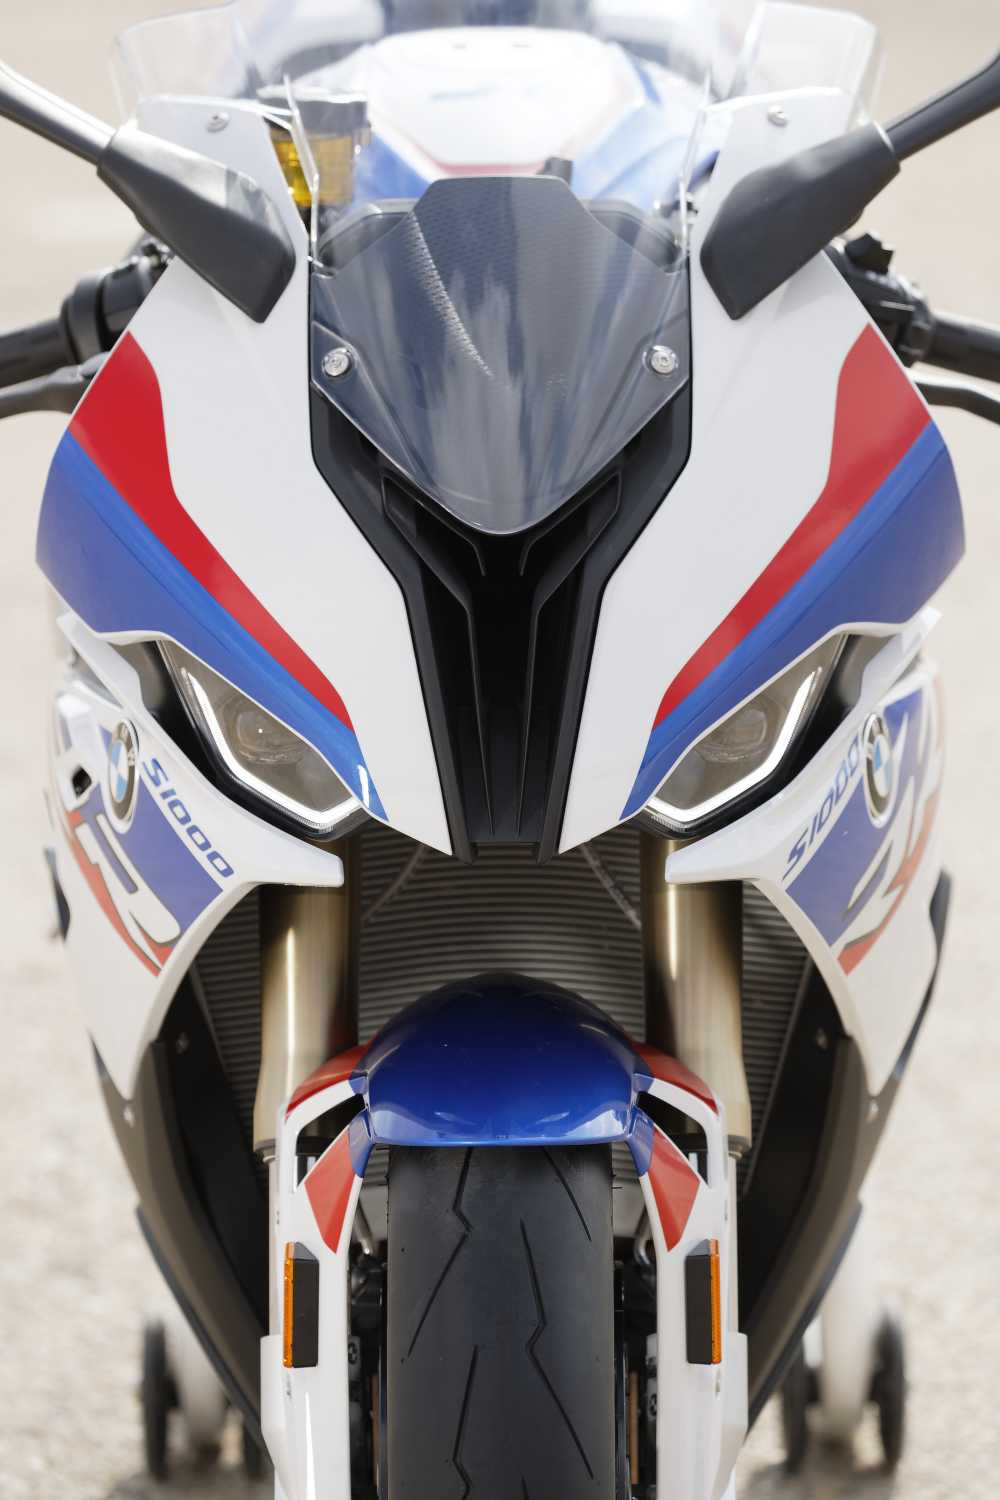 The new BMW S 1000 RR.